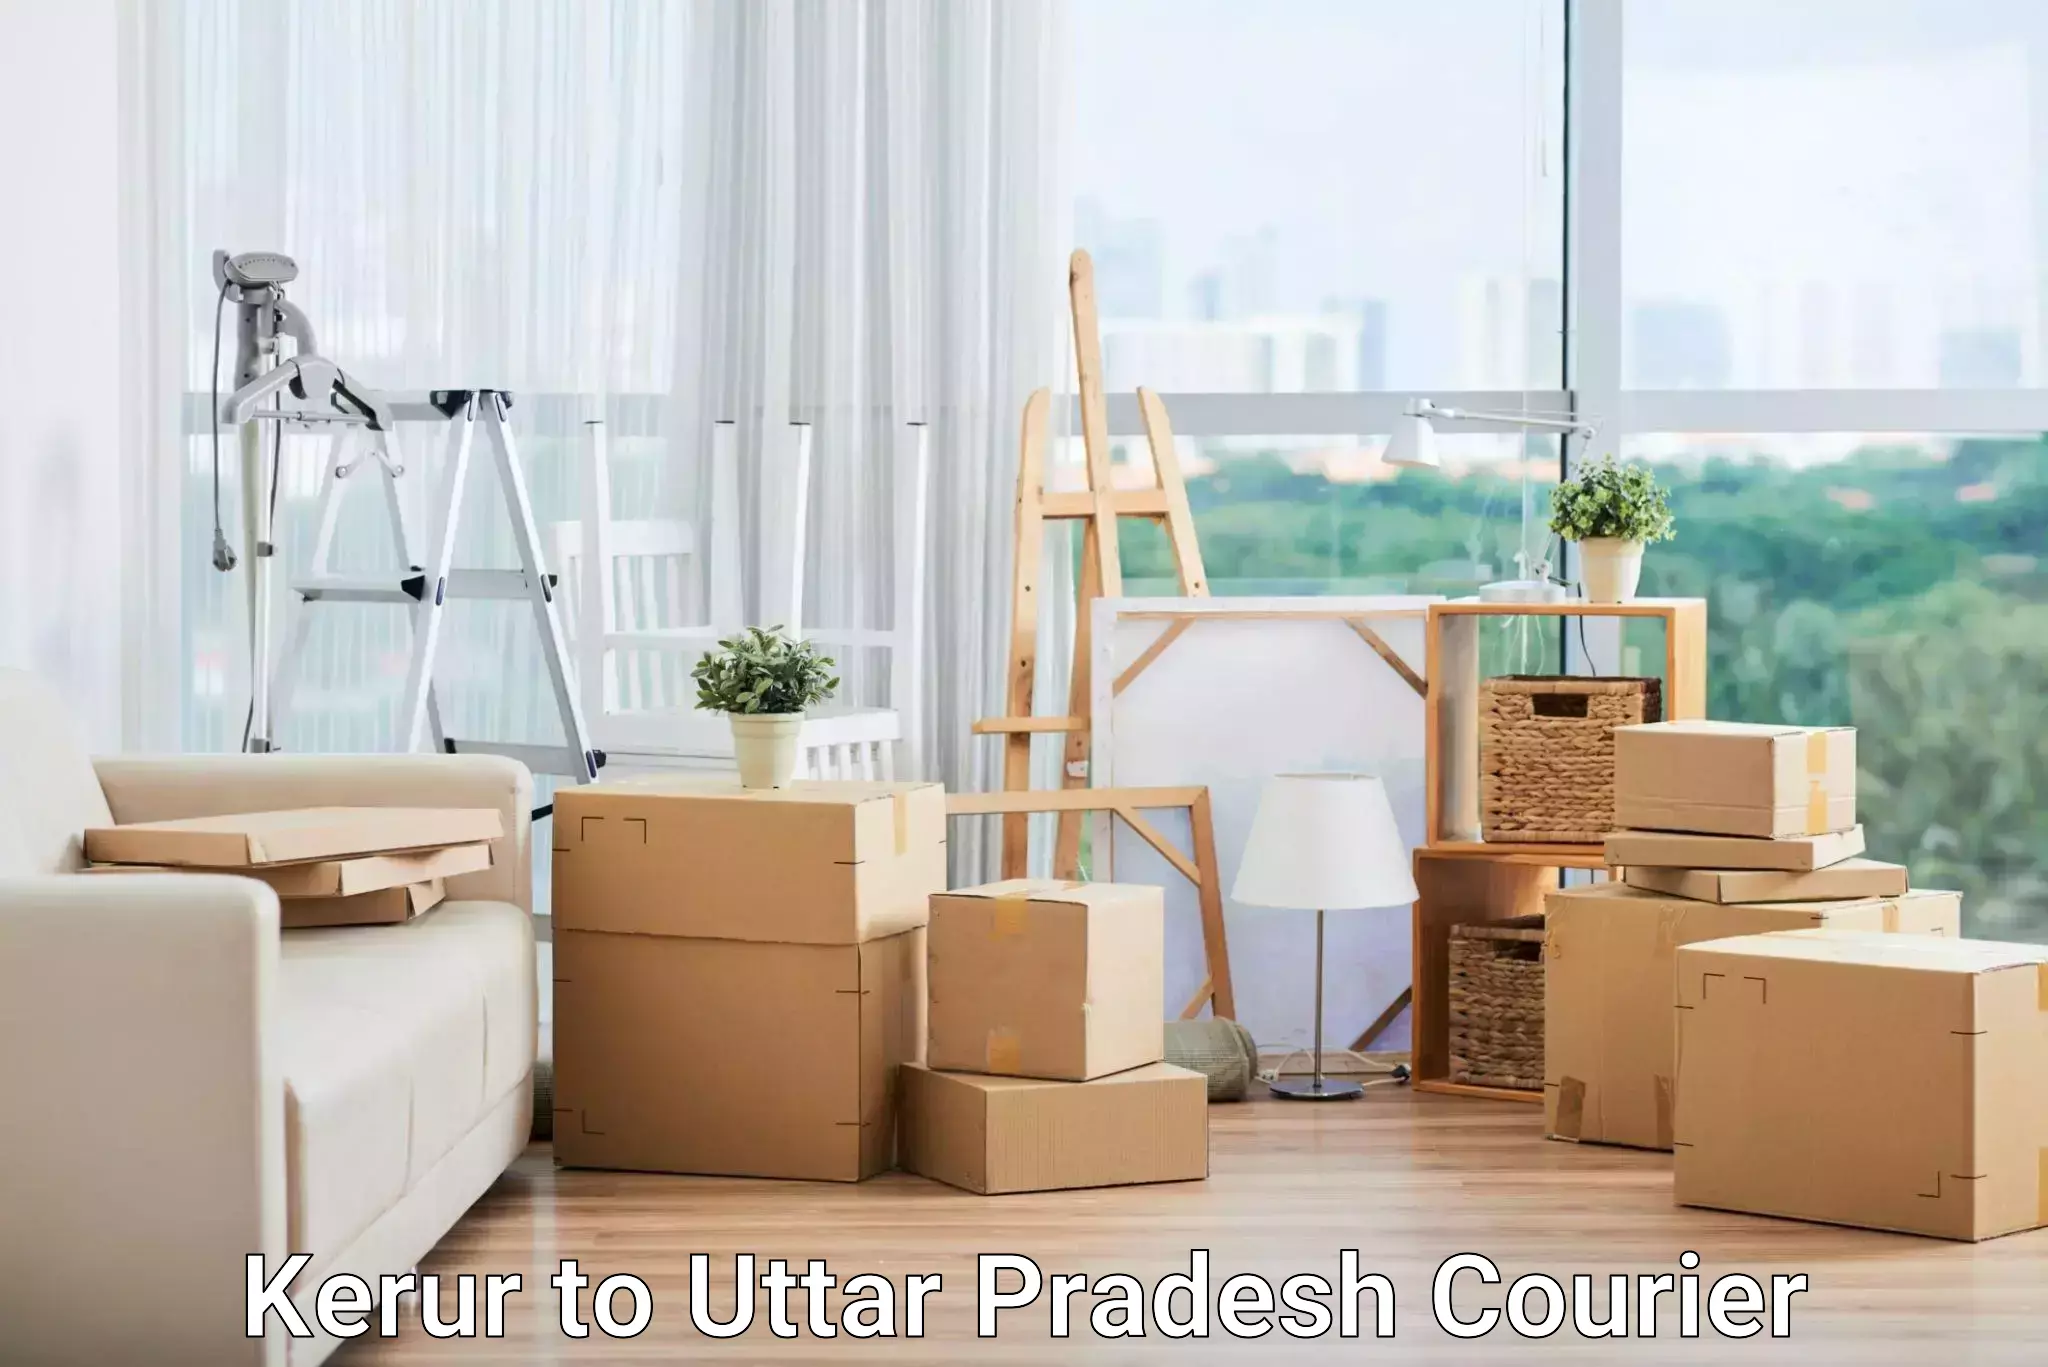 Courier service innovation Kerur to Allahabad